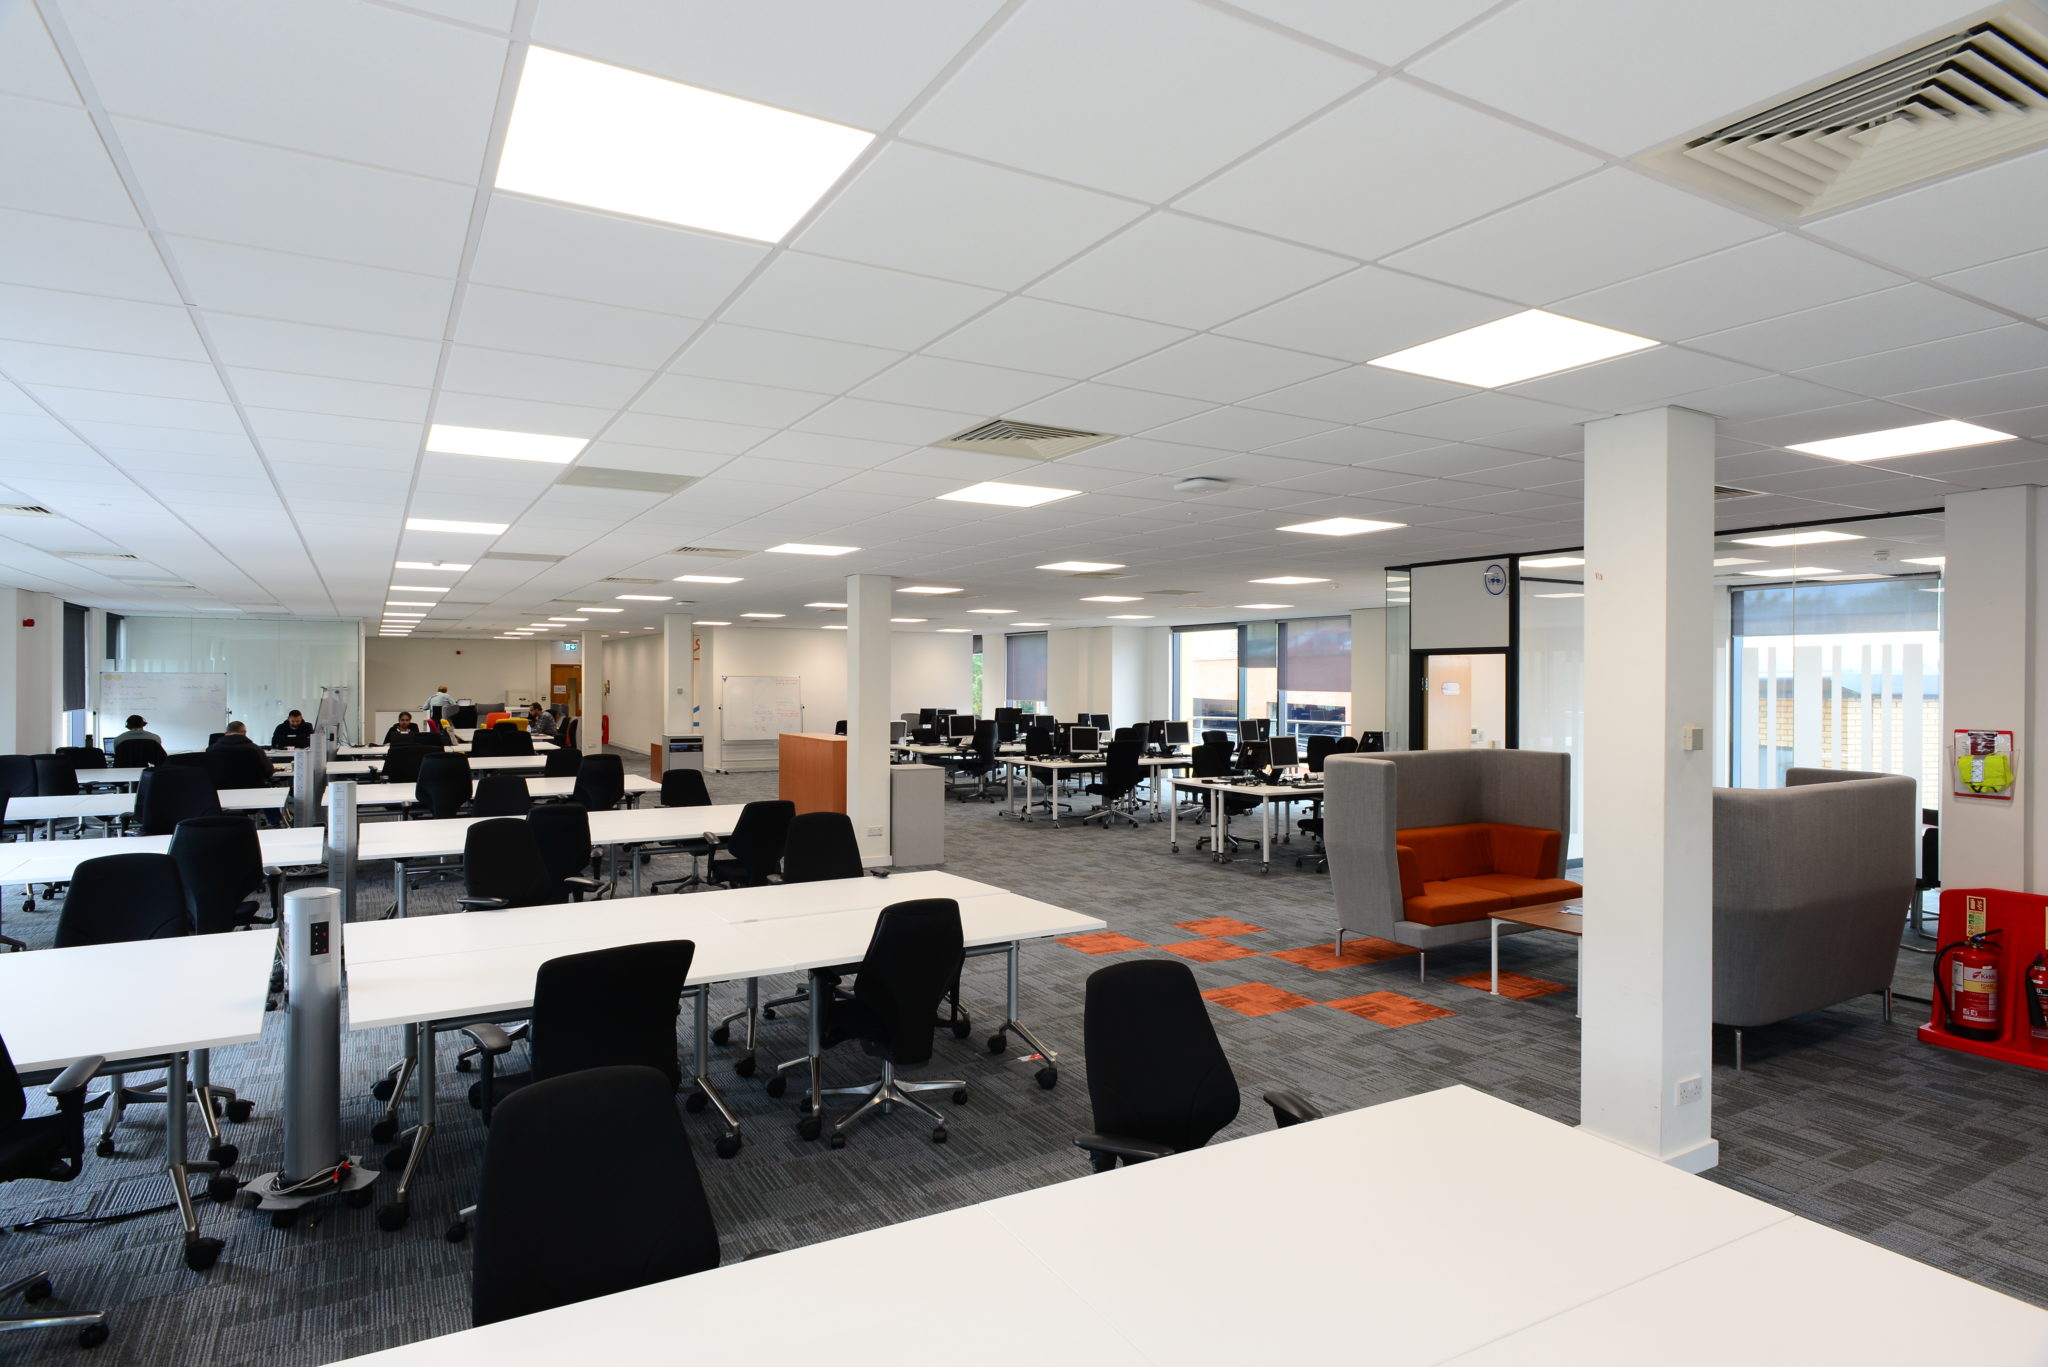 Ultra-green Armstrong ceilings help npower with in-house sustainability